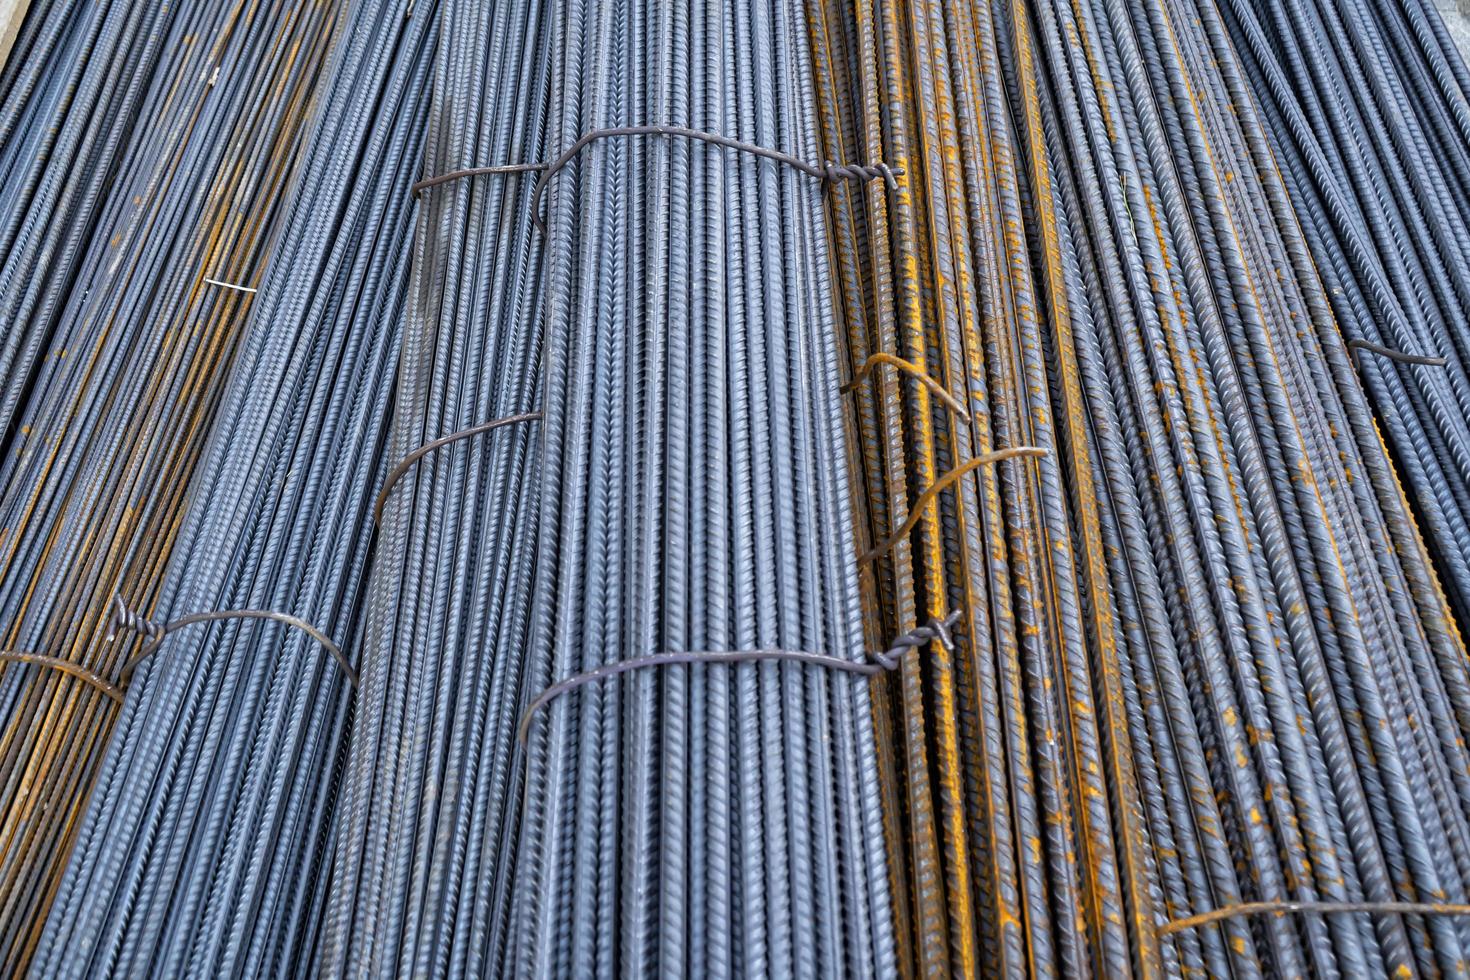 Iron construction rods in bundles photo